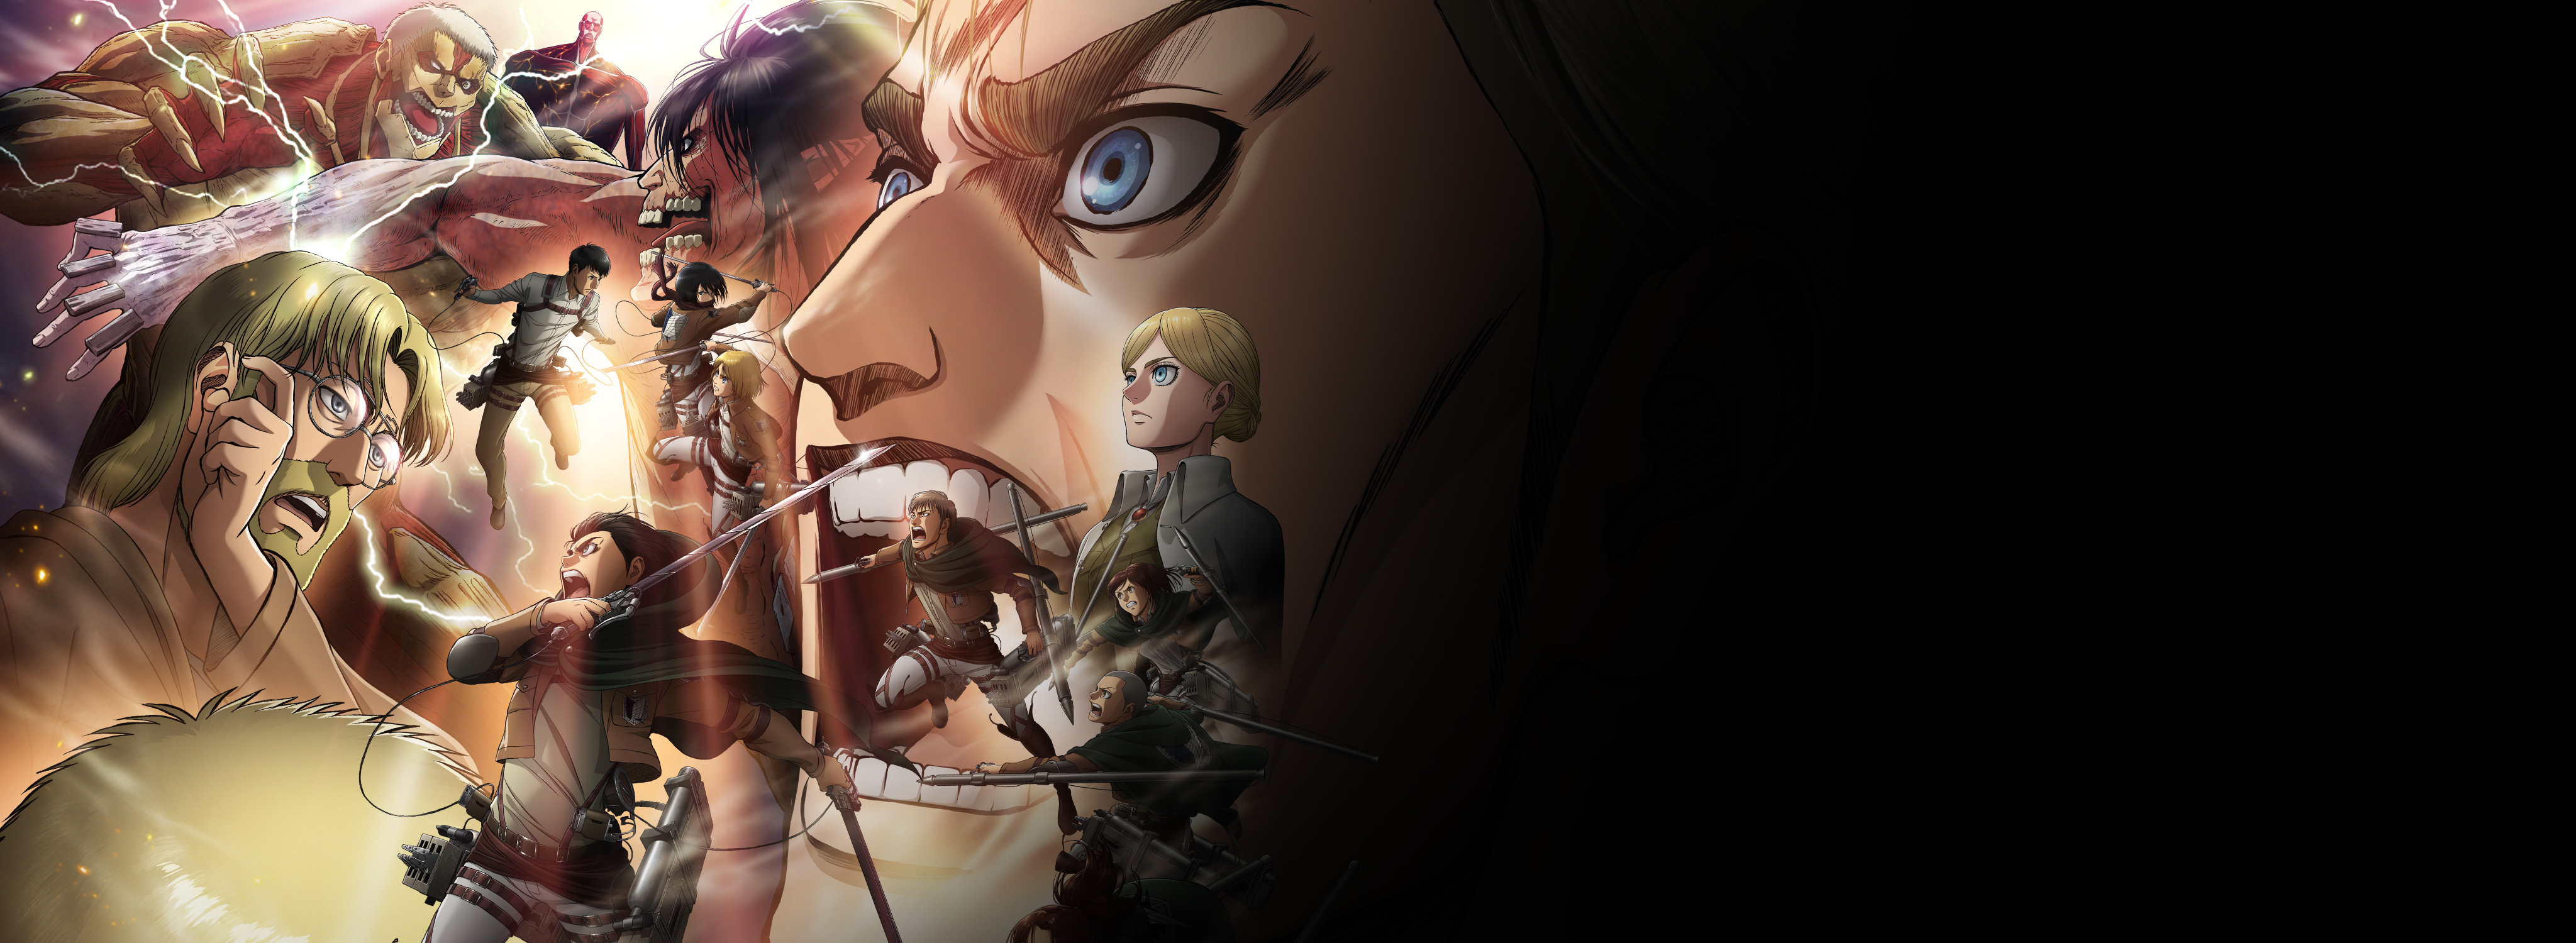 Stay connected with chiaanime to watch all attack on titan season 2 tv epis...